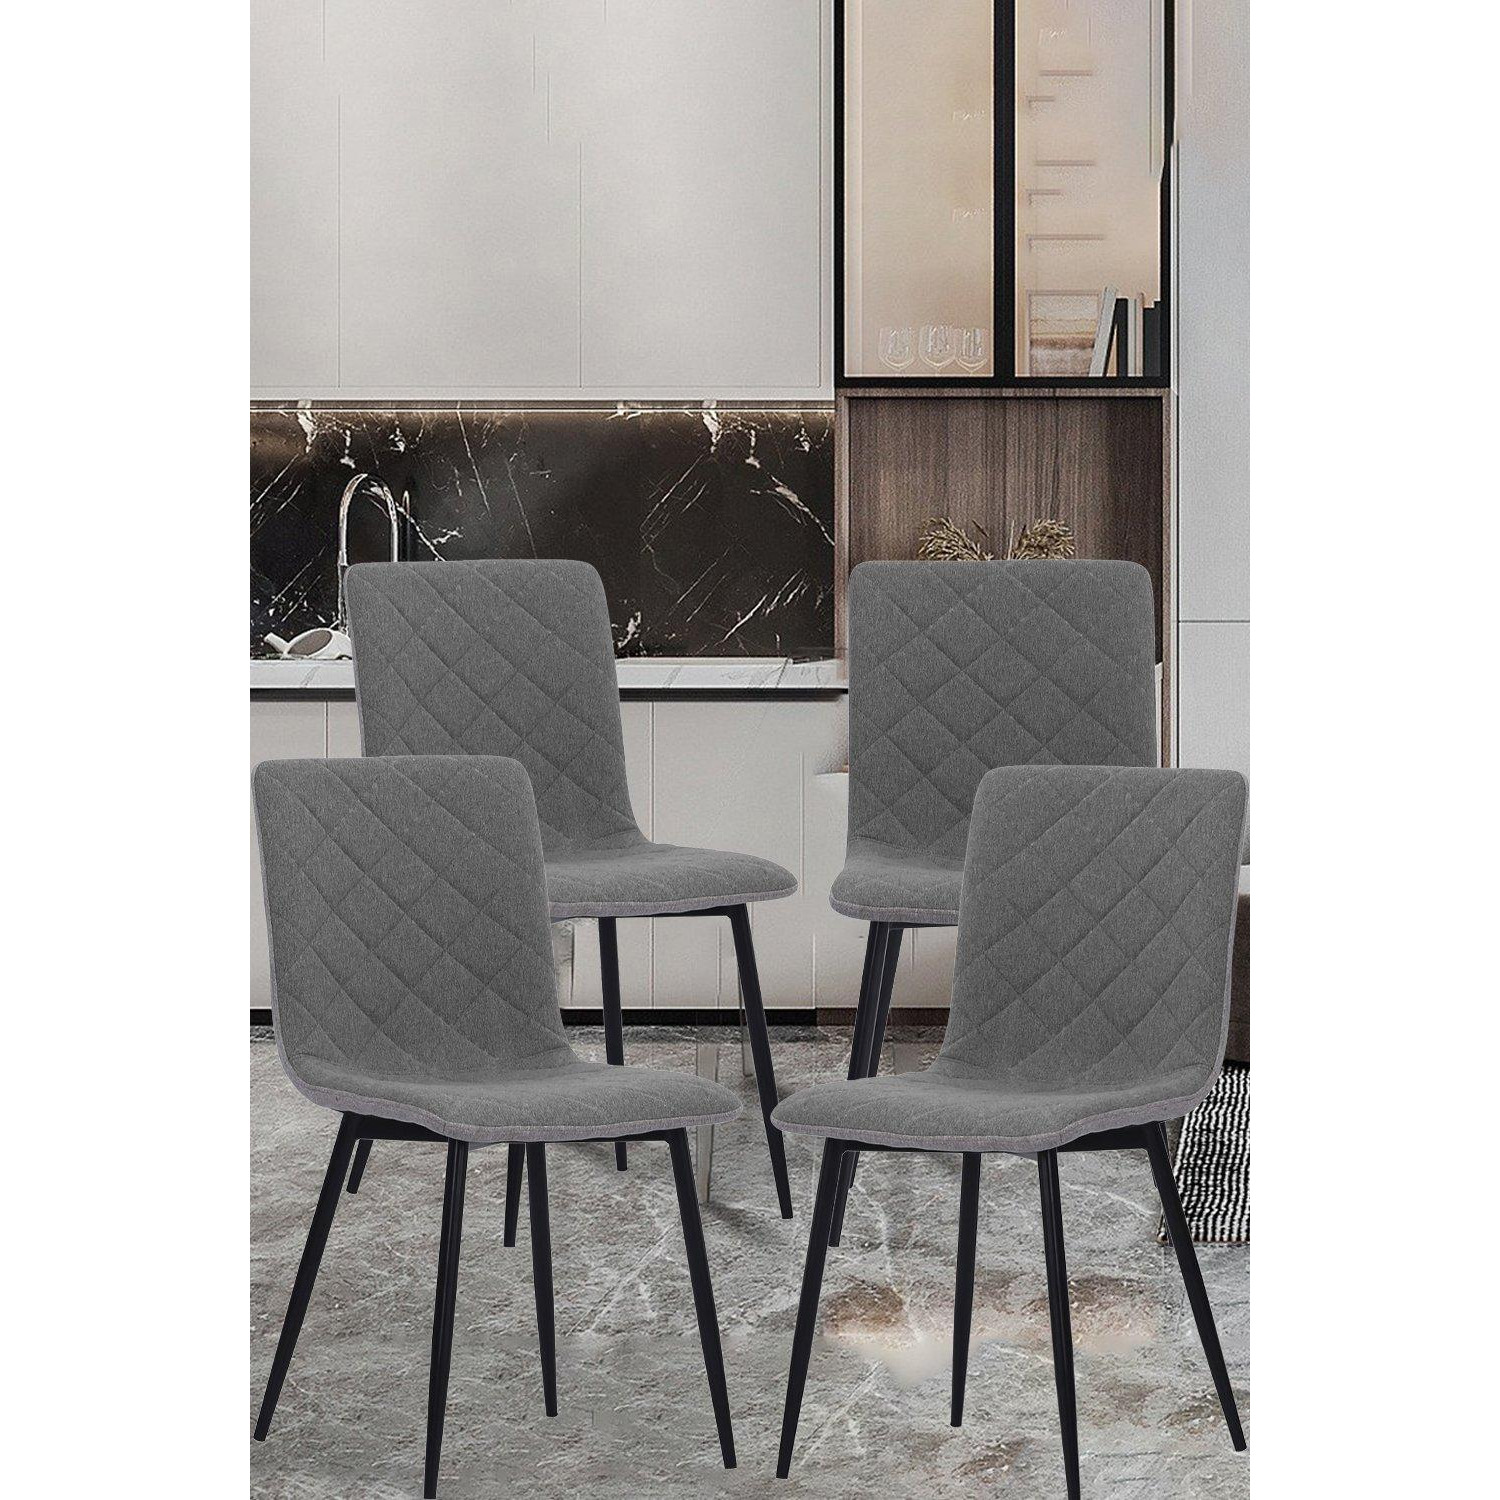 4Pcs Modern Urban Style Armless Dining Chairs - image 1